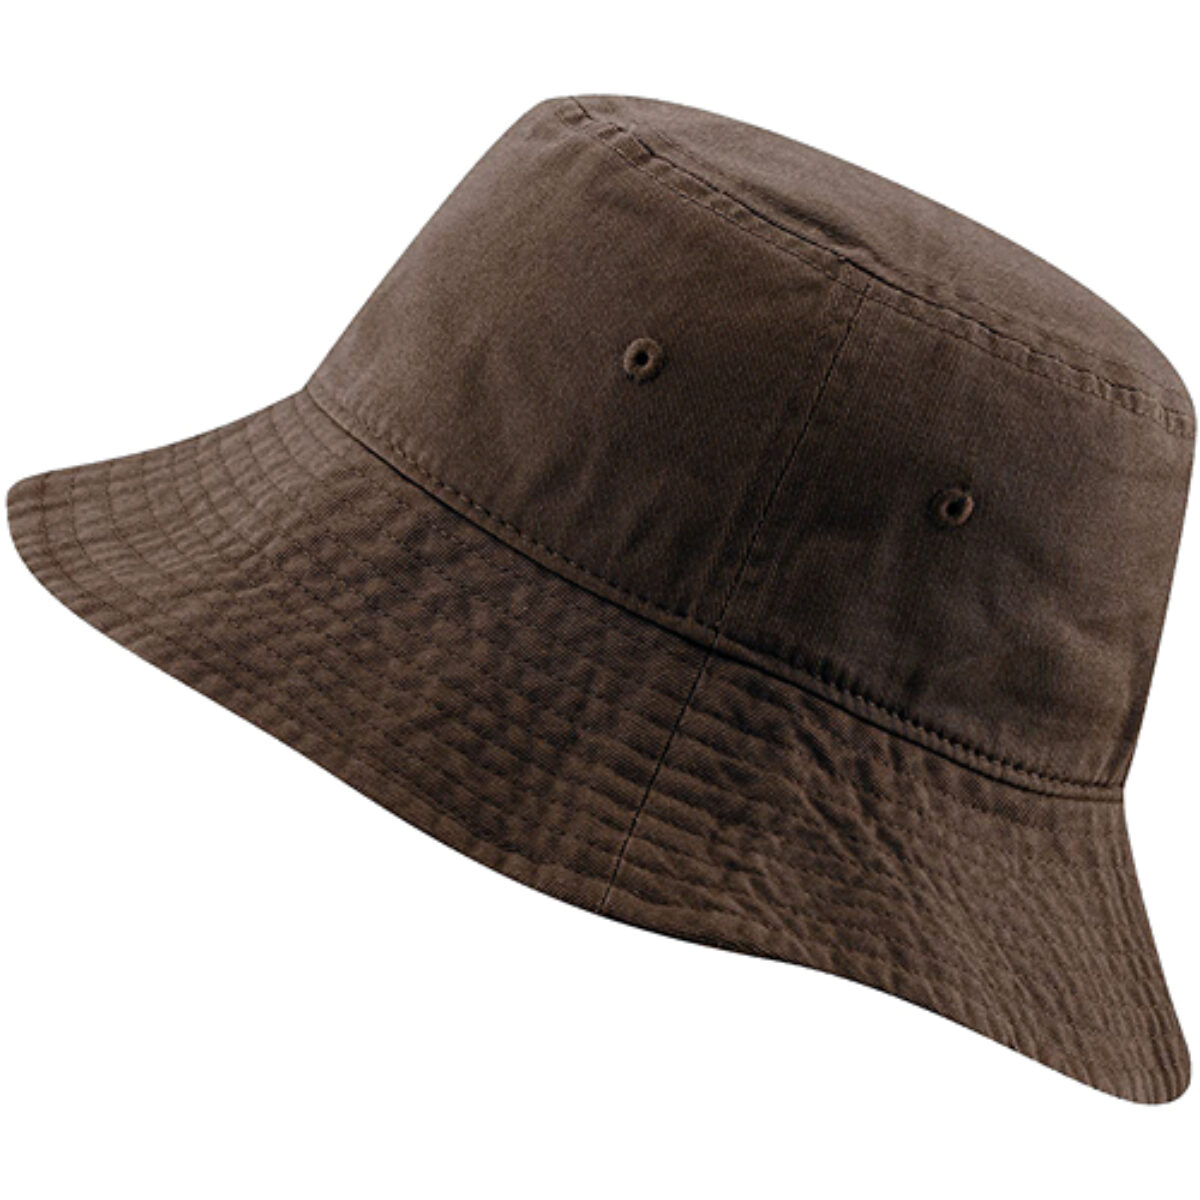 Lightweight Fabric with The Cotton Winter Worm Bucket Hat, Brown